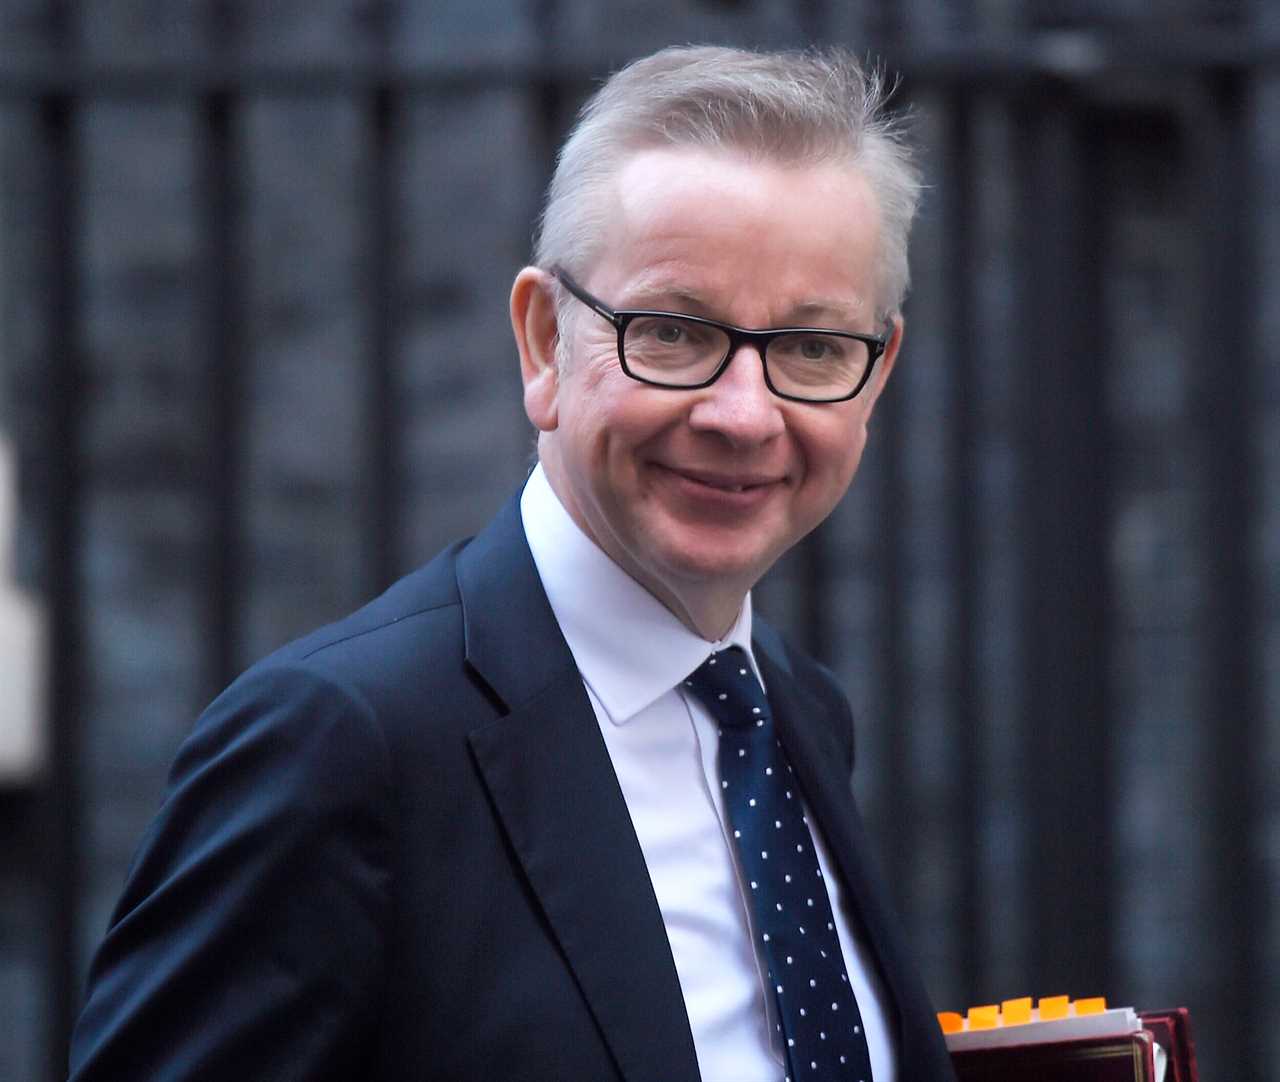 Watch Michael Gove hit the dancefloor again as he busts some moves with woman to disco tune